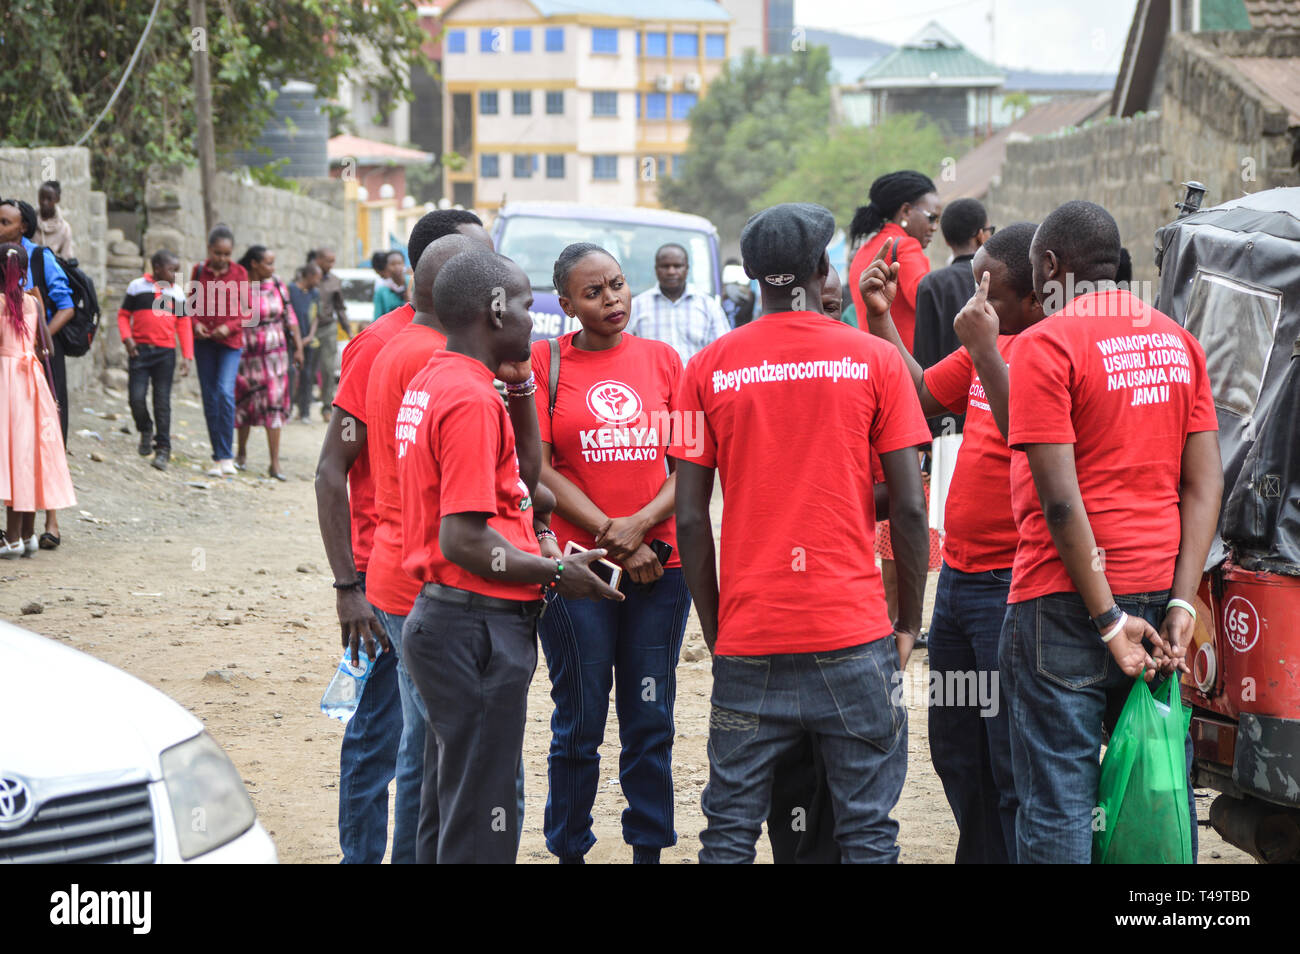 A group of activists allied to  Kenya’s Red Vests Movement are seen discussing after a church service. Activists allied to Kenya’s Red Vests Movement were protesting silently about increased levels of corruption in the government, the activists are demanding action to be taken against all government officials involved in corruption. Kenya loses billions of dollars to corruption in government departments every year and very less action is taken to curb the vice. Every Sunday the activists conduct an anti-corruption protest in churches and streets in different towns of Kenya hoping that the gove Stock Photo